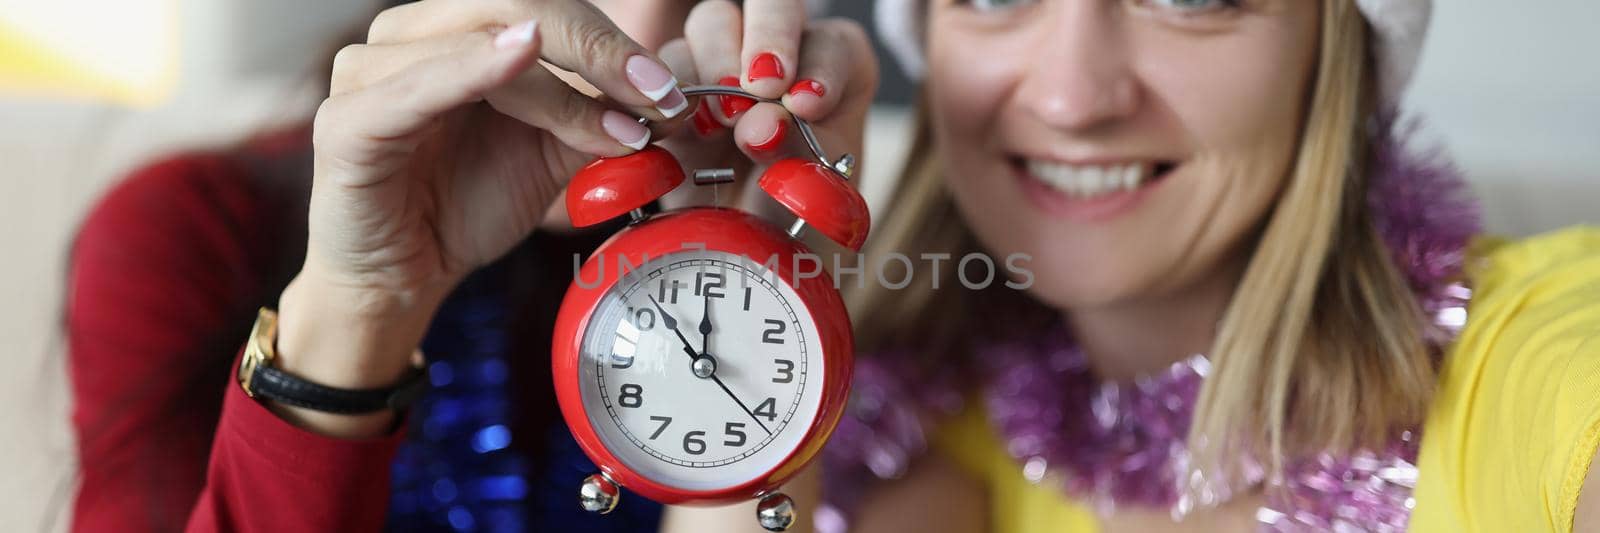 Sisters smile and hold red retro clock with arrows placed on midnight by kuprevich